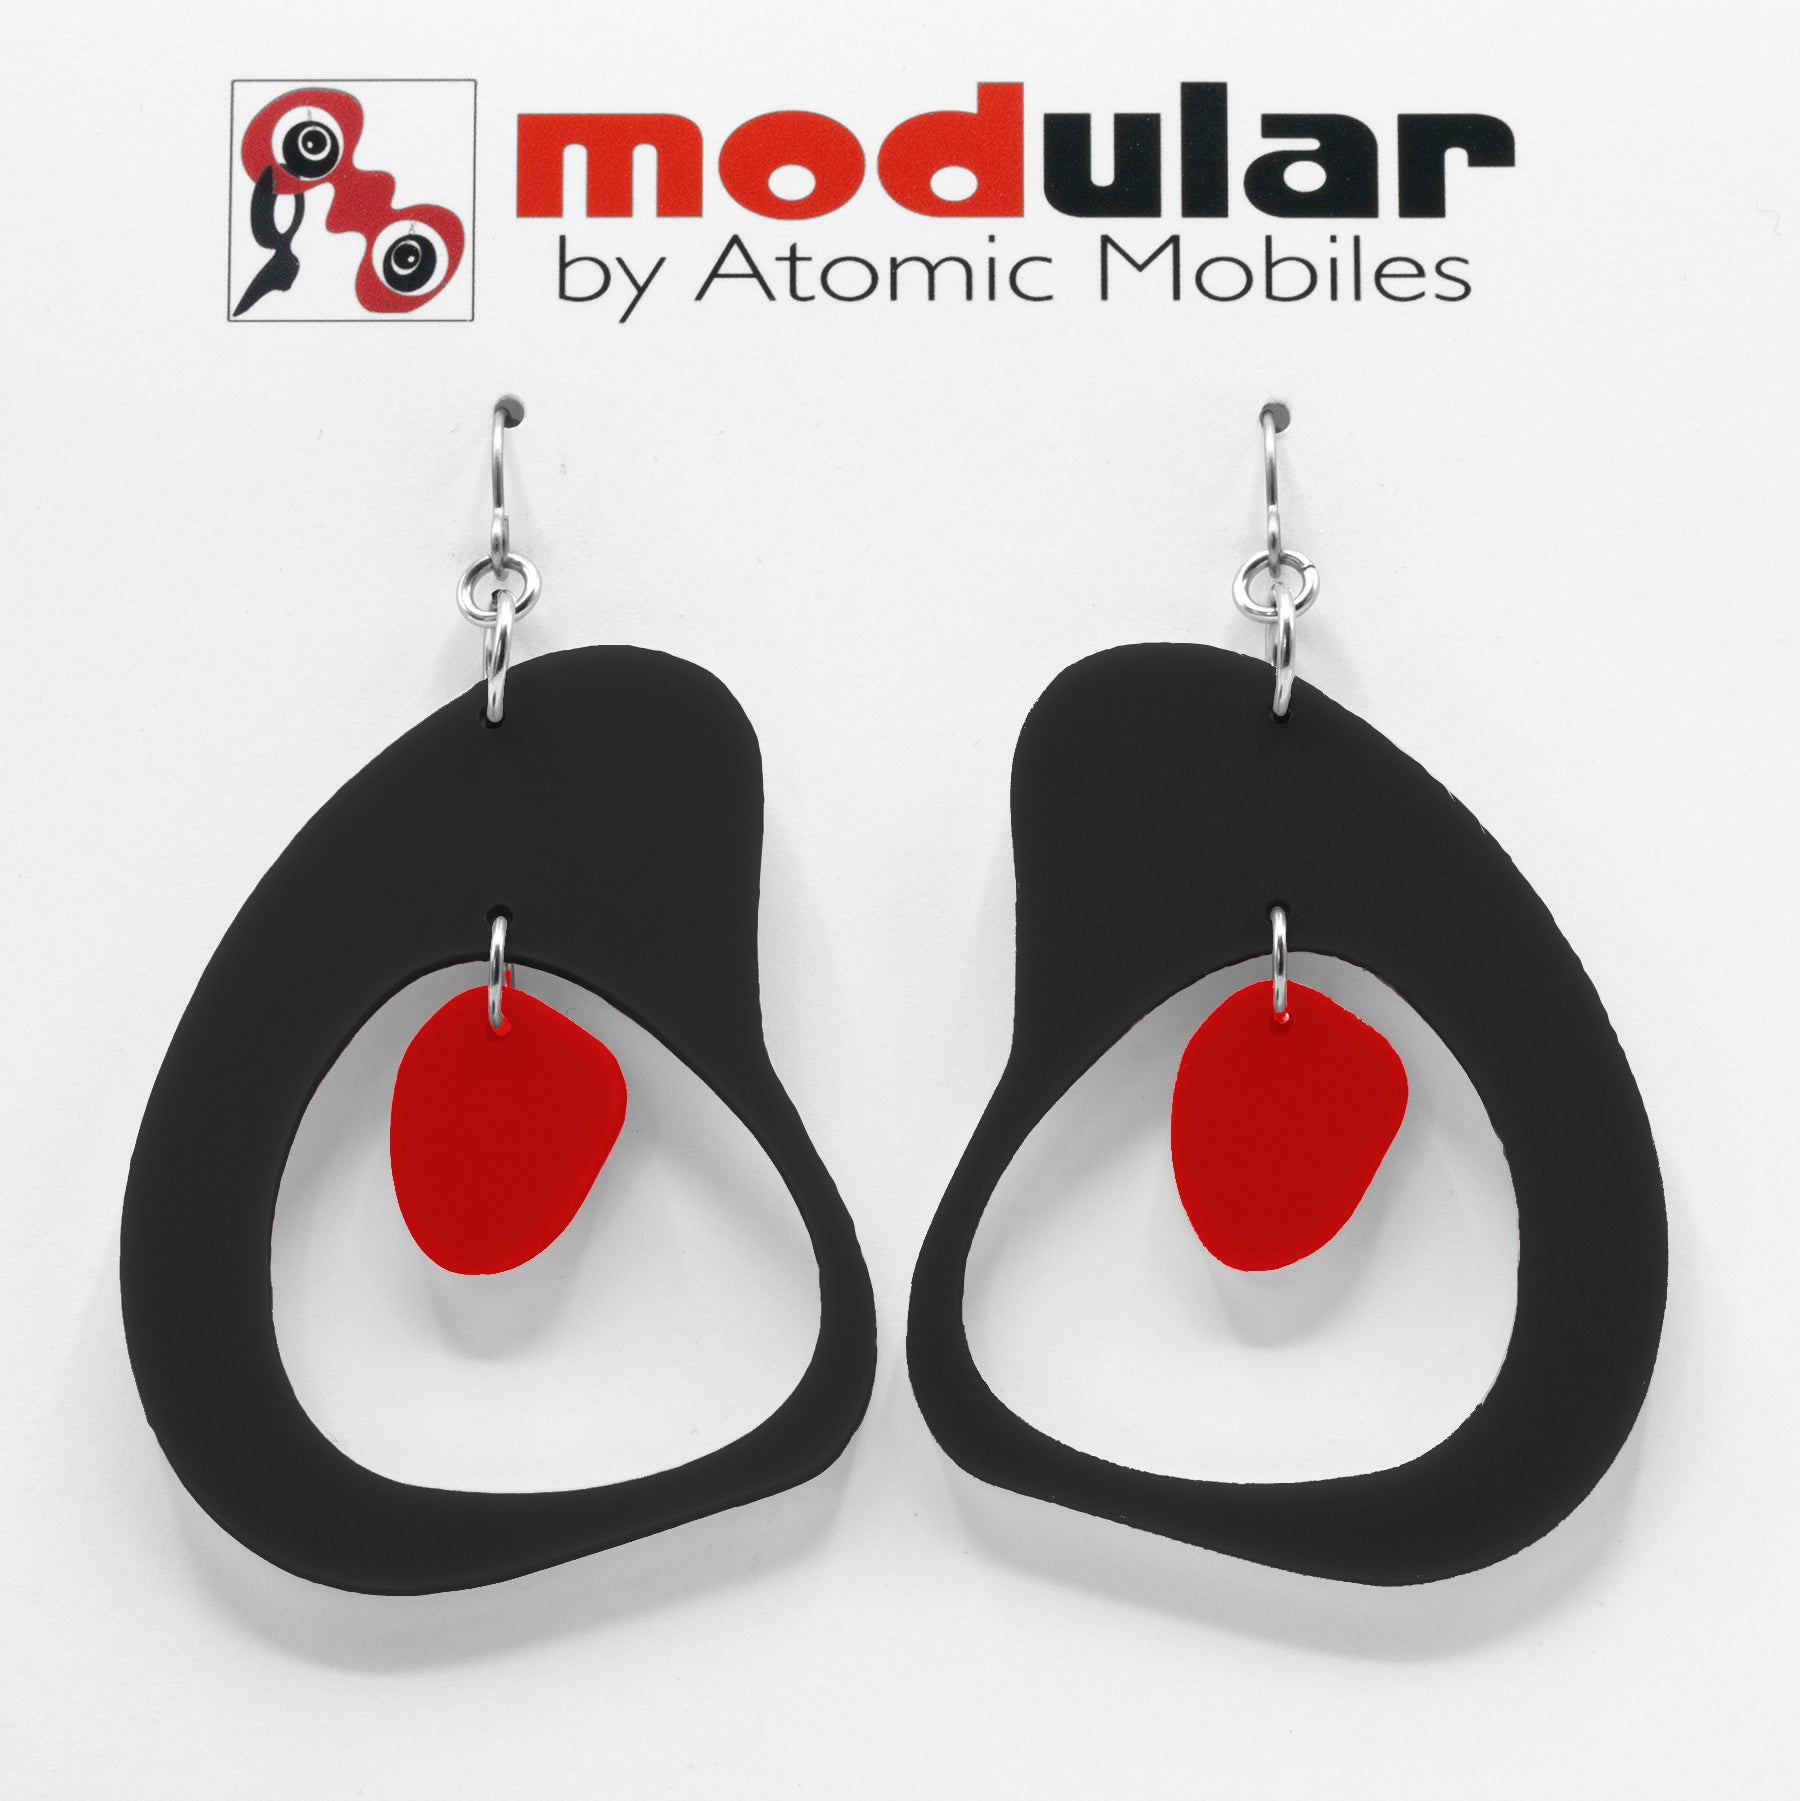 MODular Earrings - Boomerang Statement Earrings in Black and Red by AtomicMobiles.com - retro era inspired mod handmade jewelry